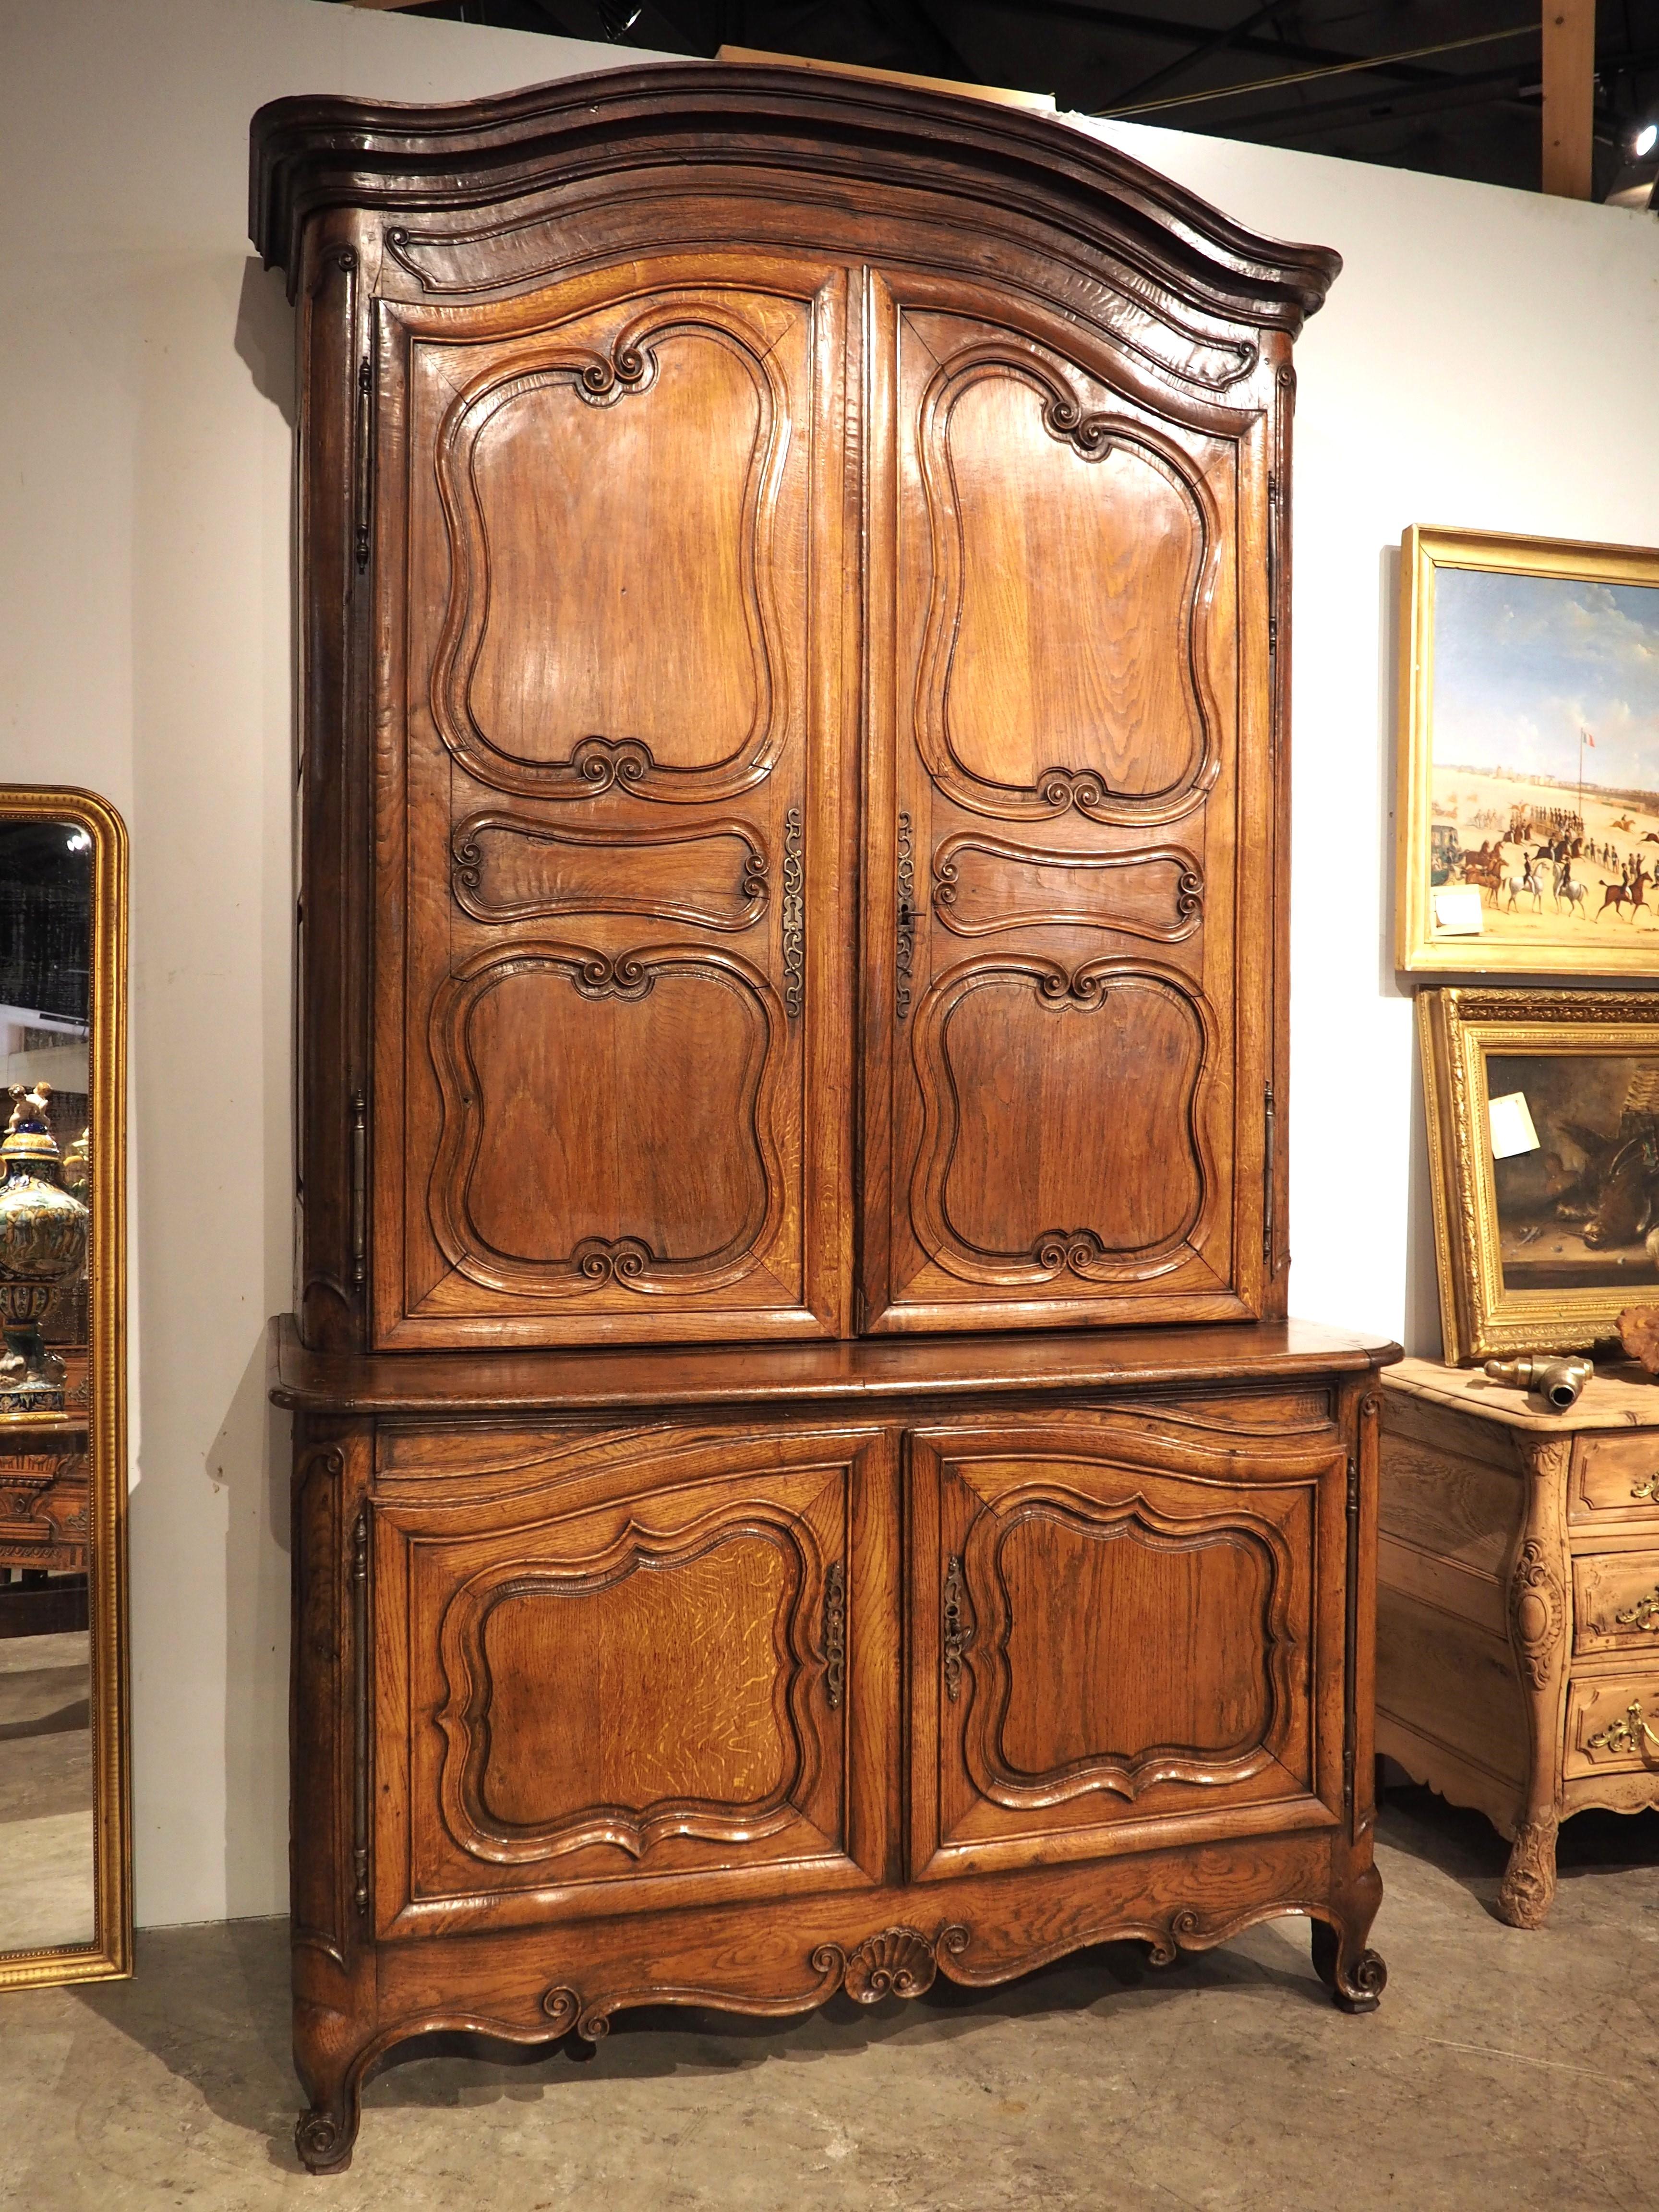 A Grand 18th Century French Oak Buffet Deux Corps from the Perche Region For Sale 6